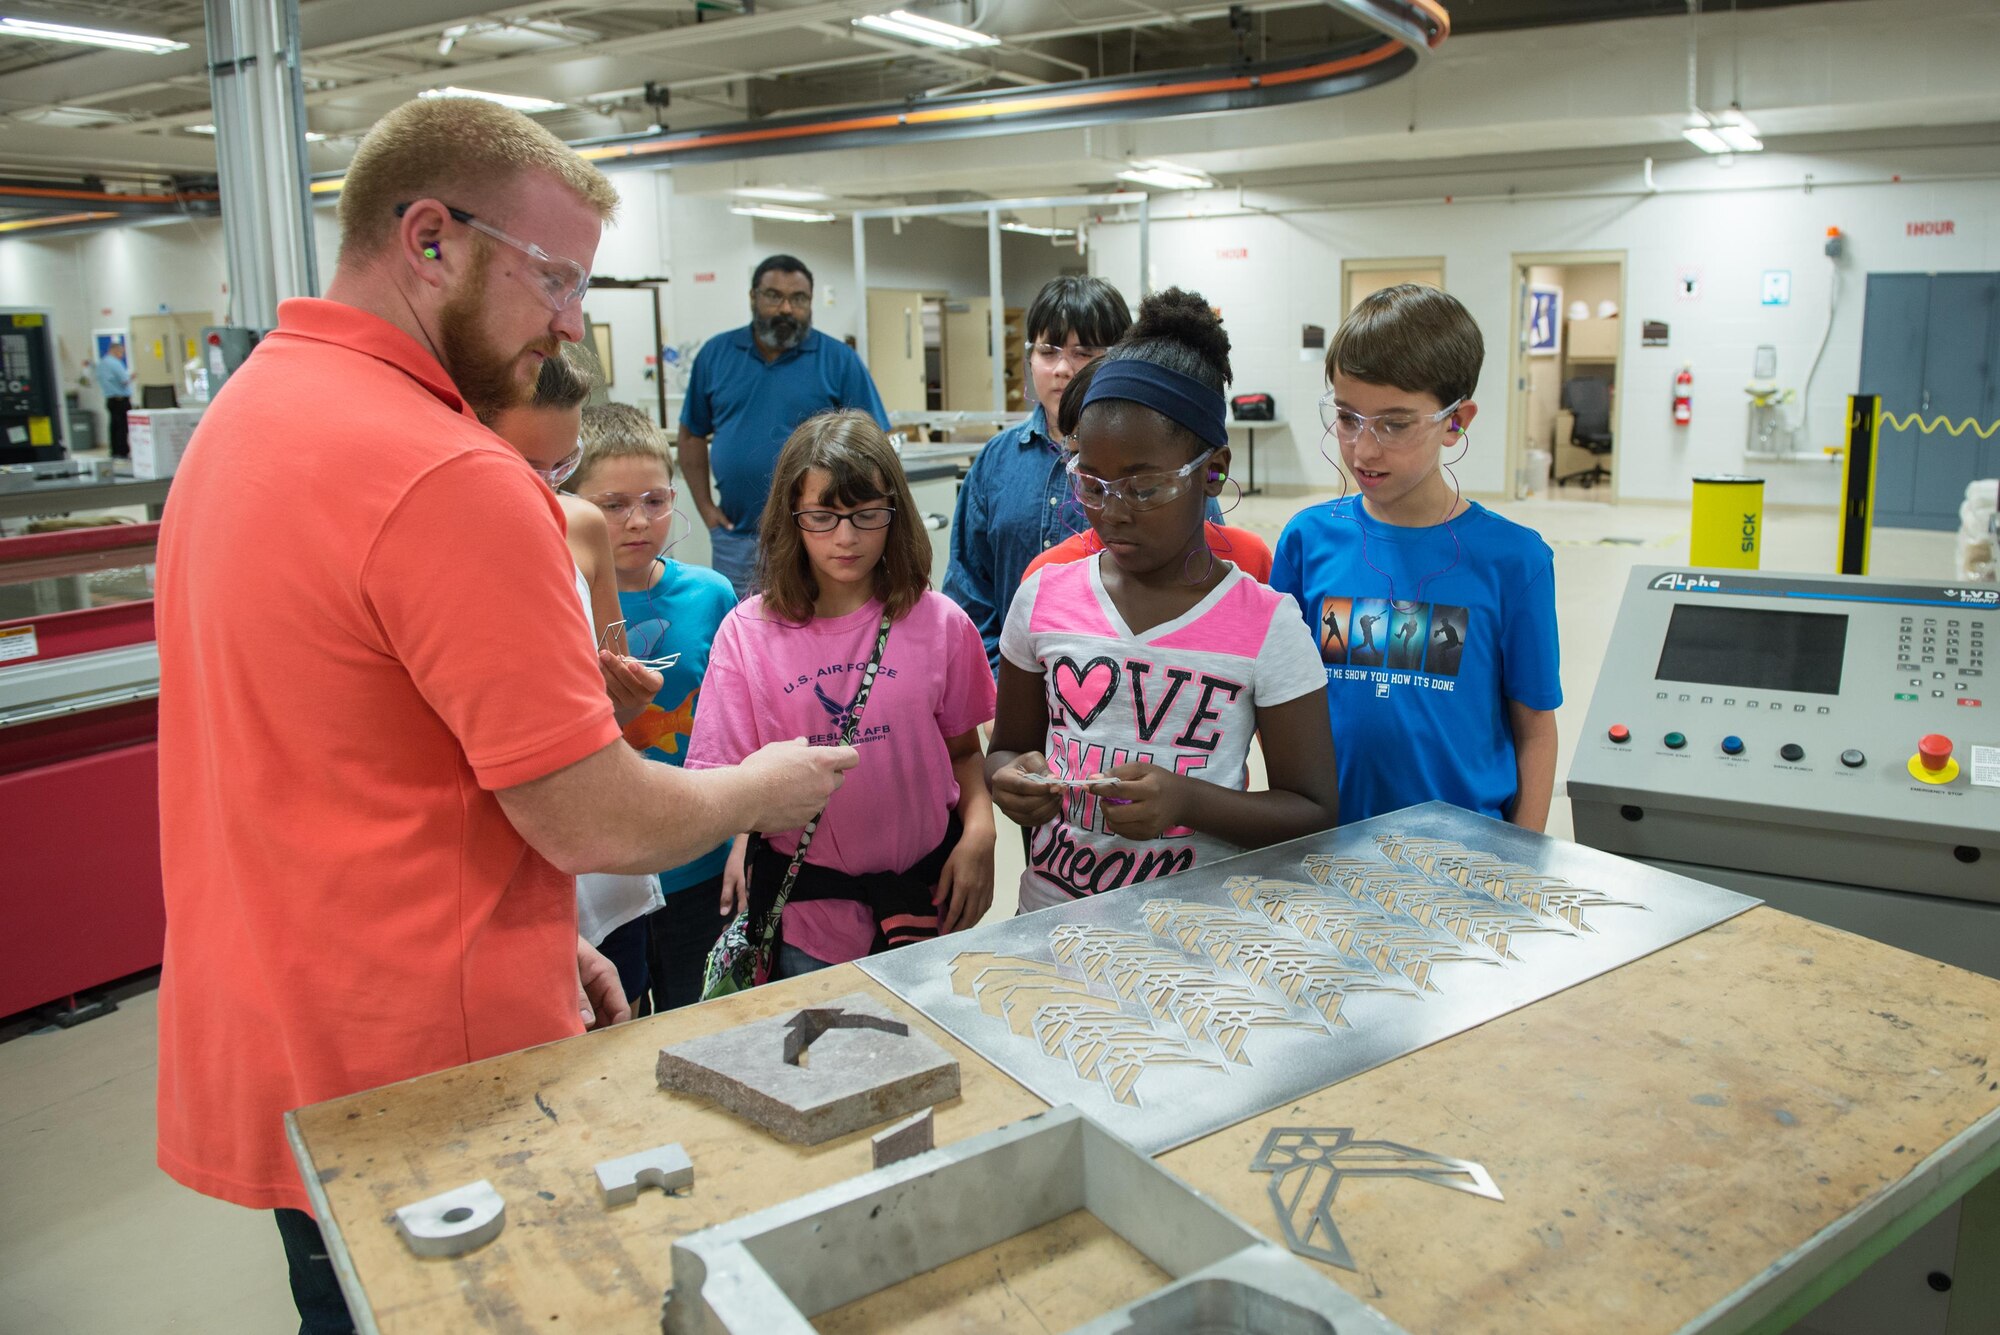 James McCanless, 336th Training Squadron machinist, distributes Air Force logo metal cuts to visiting  Science, Technology, Engineering, and Mathematics Camp students June 23, 2016, on Keesler Air Force Base, Miss. Keesler partnered with the Biloxi School District, Biloxi, Miss. in a week-long summer program designed to educate and enrich middle school students interested in science, technology, engineering or mathematics. (U.S. Air Force photo by Marie Floyd/Released)